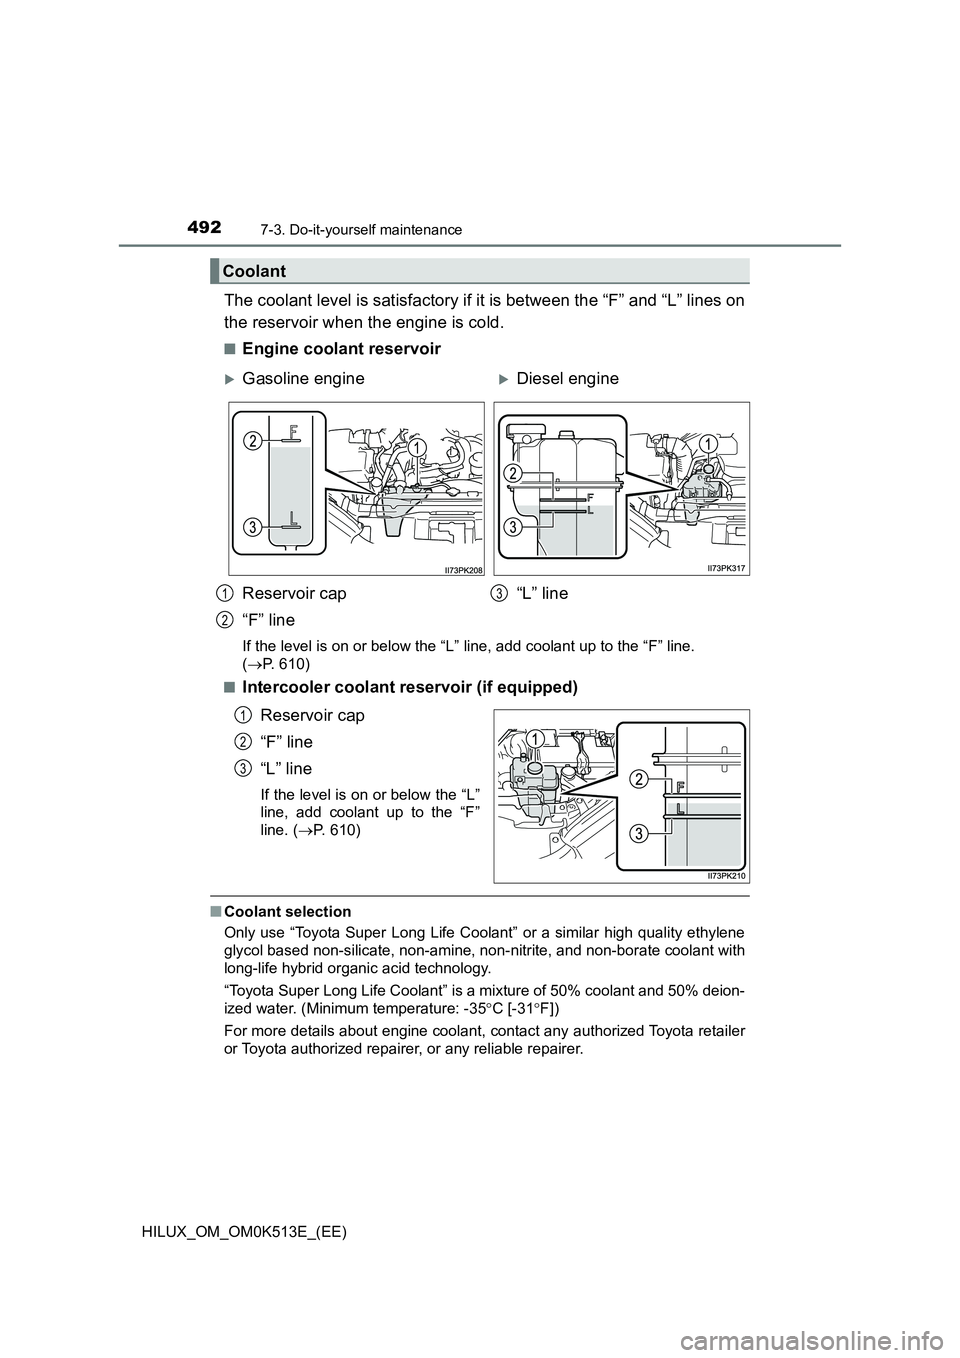 TOYOTA HILUX 2021  Owners Manual (in English) 4927-3. Do-it-yourself maintenance
HILUX_OM_OM0K513E_(EE)
The coolant level is satisfactory if it is between the “F” and “L” lines on 
the reservoir when the engine is cold.
�QEngine coolant r